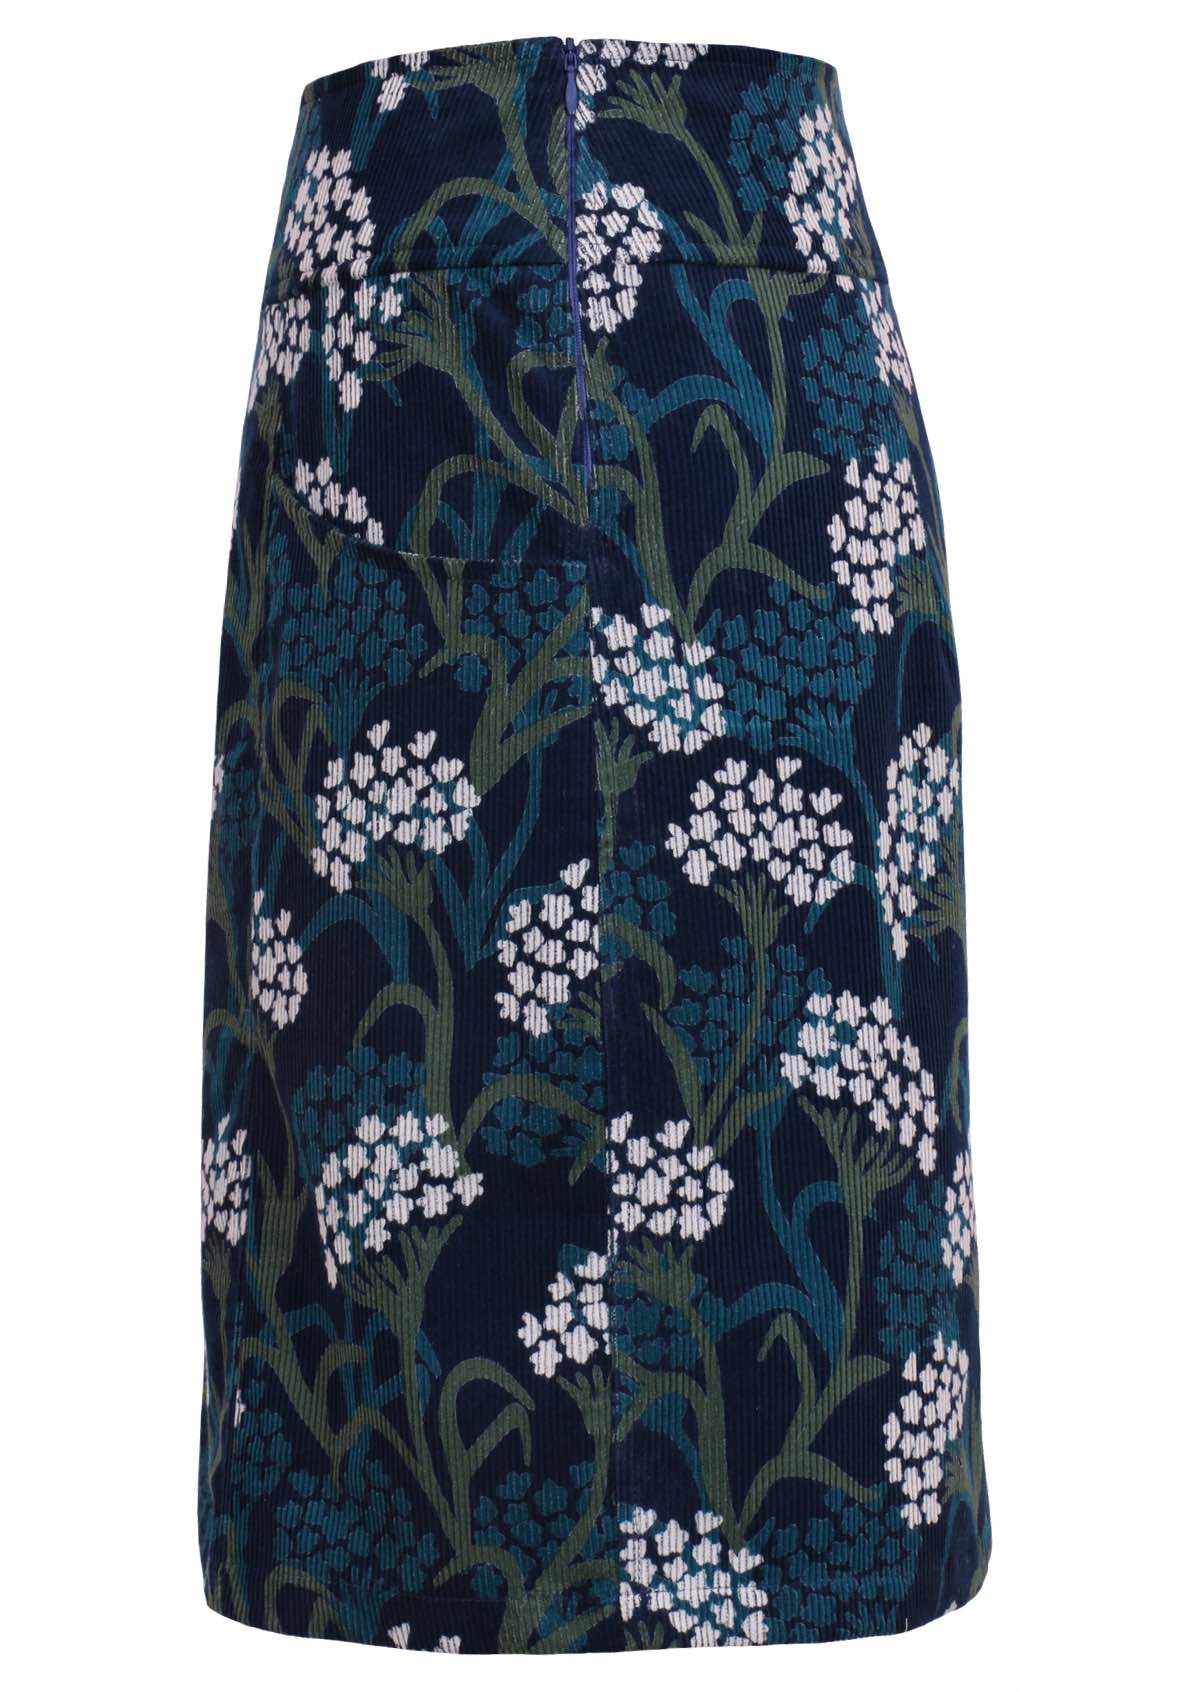 100% cotton corduroy skirt with floral print and pockets. 